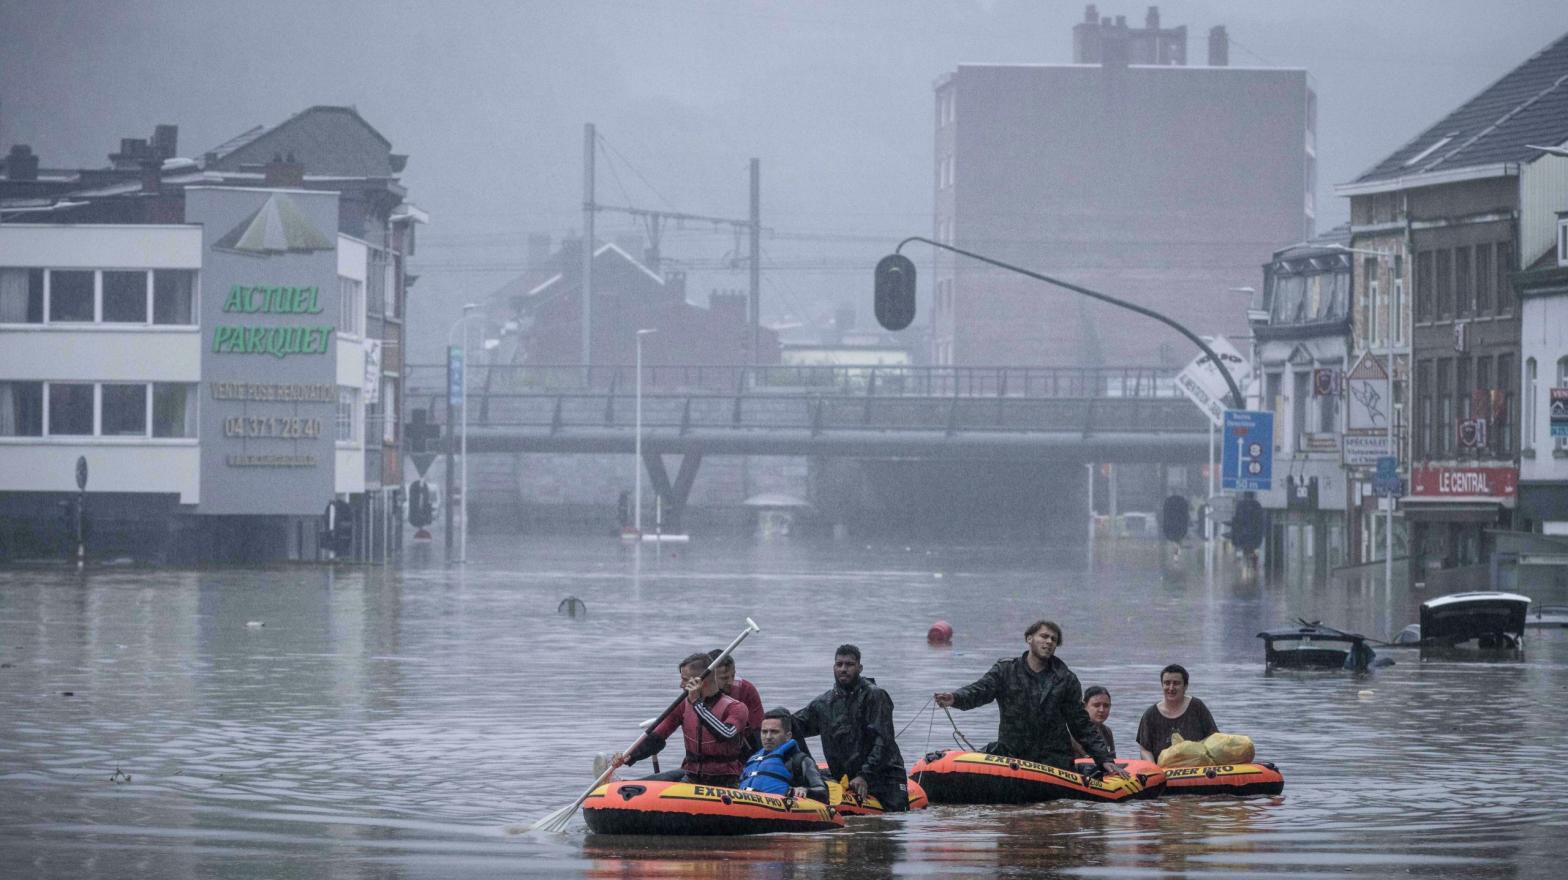 People use rubber rafts in floodwaters after the Meuse River broke its banks during heavy flooding in Liege, Belgium, Thursday, July 15. (Photo: Valentin Bianchi, AP)